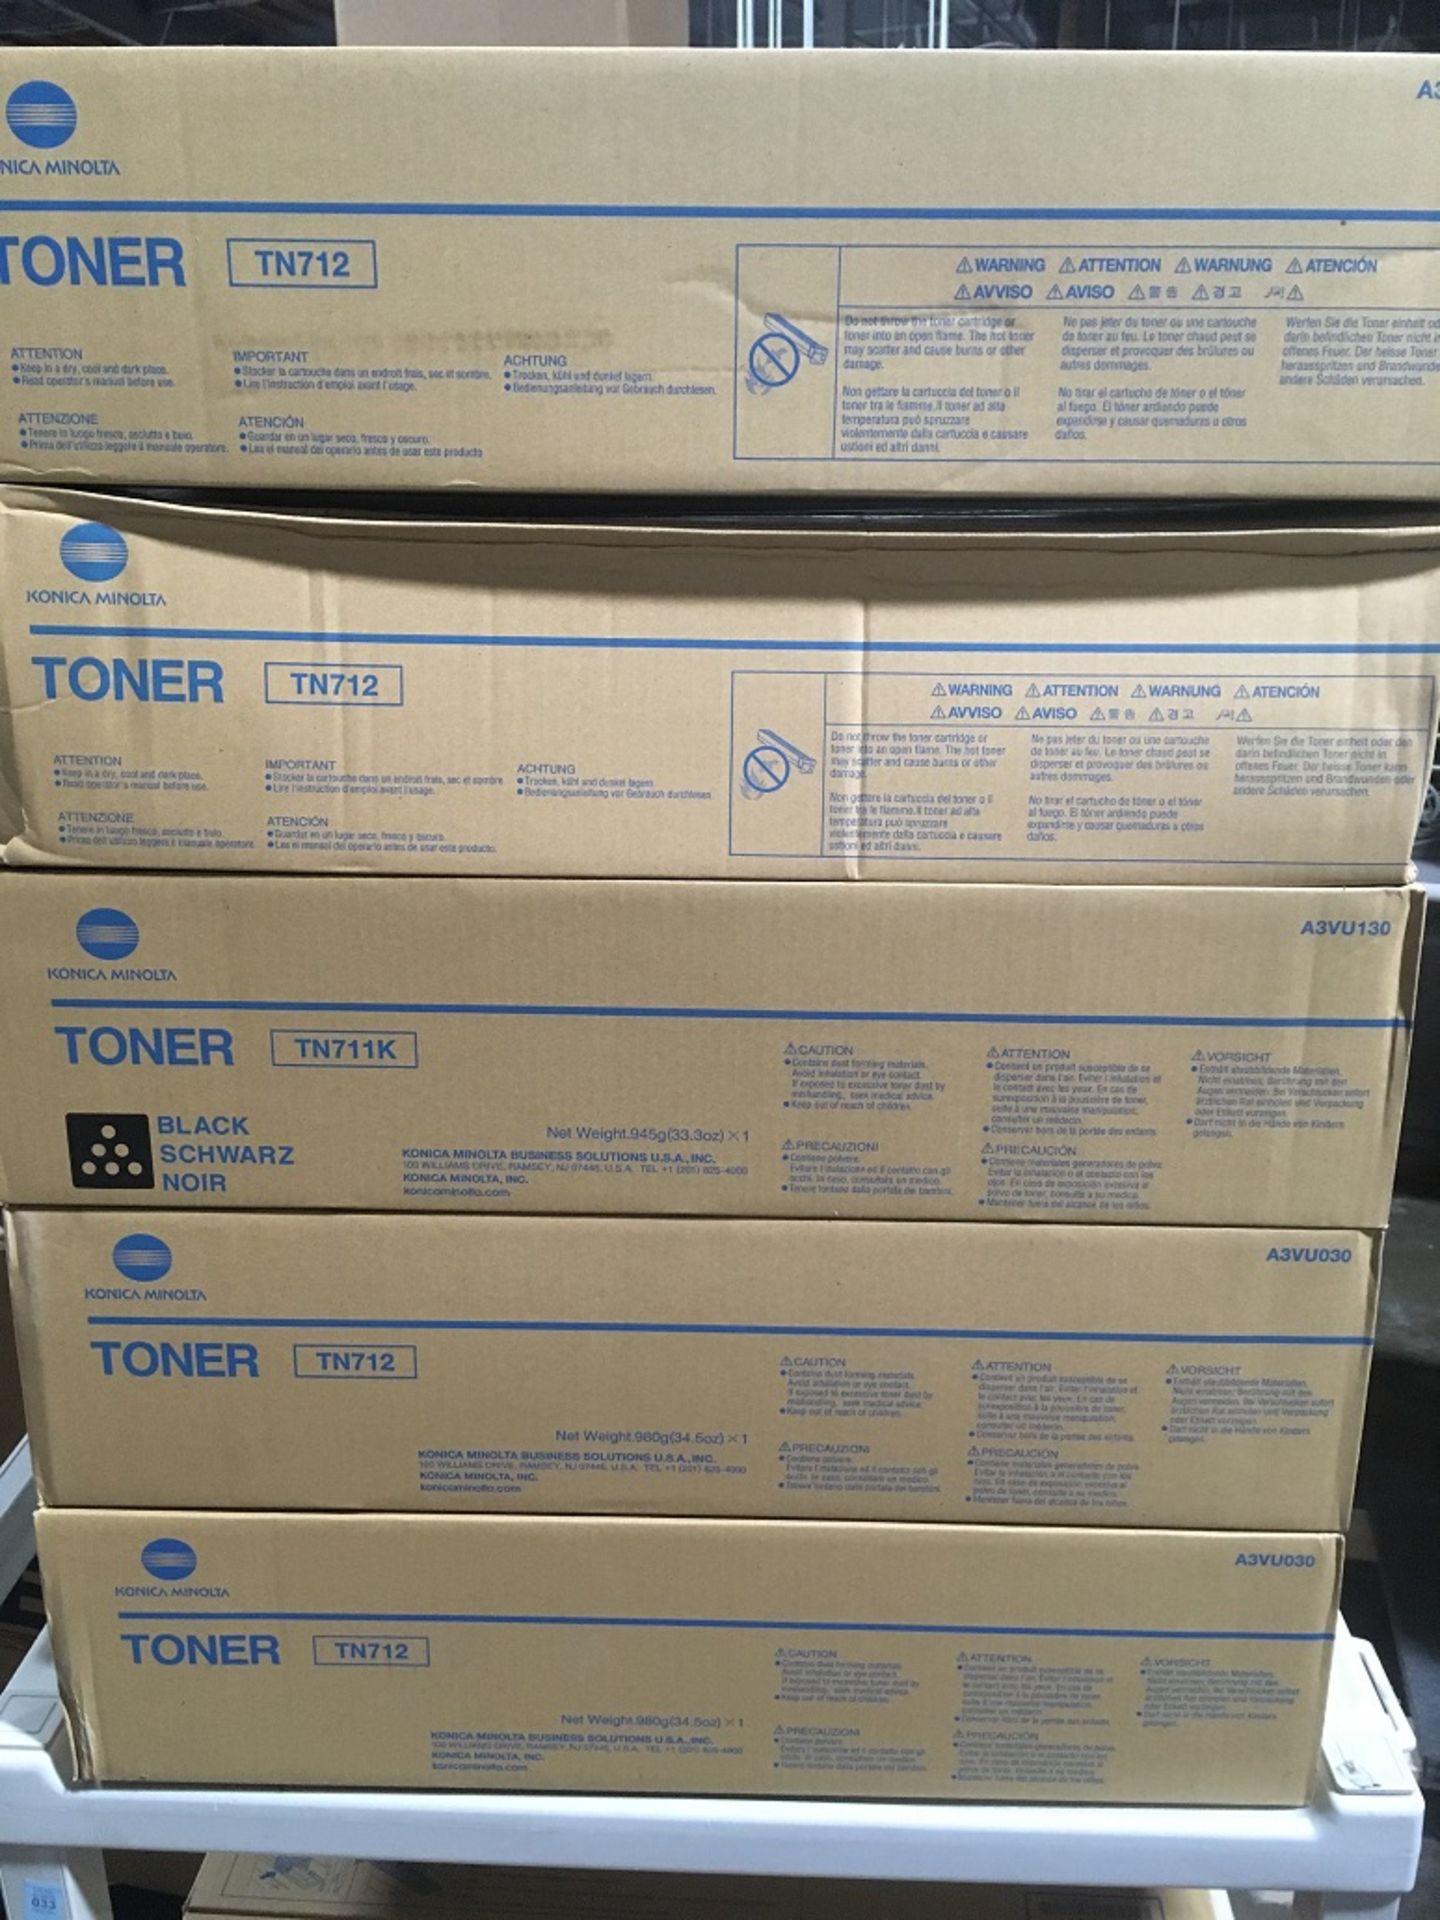 Konica-Minolta, Ricoh, HP OEM, Toner Cartridges and Waste Containers etc. (Lot) - Image 2 of 5